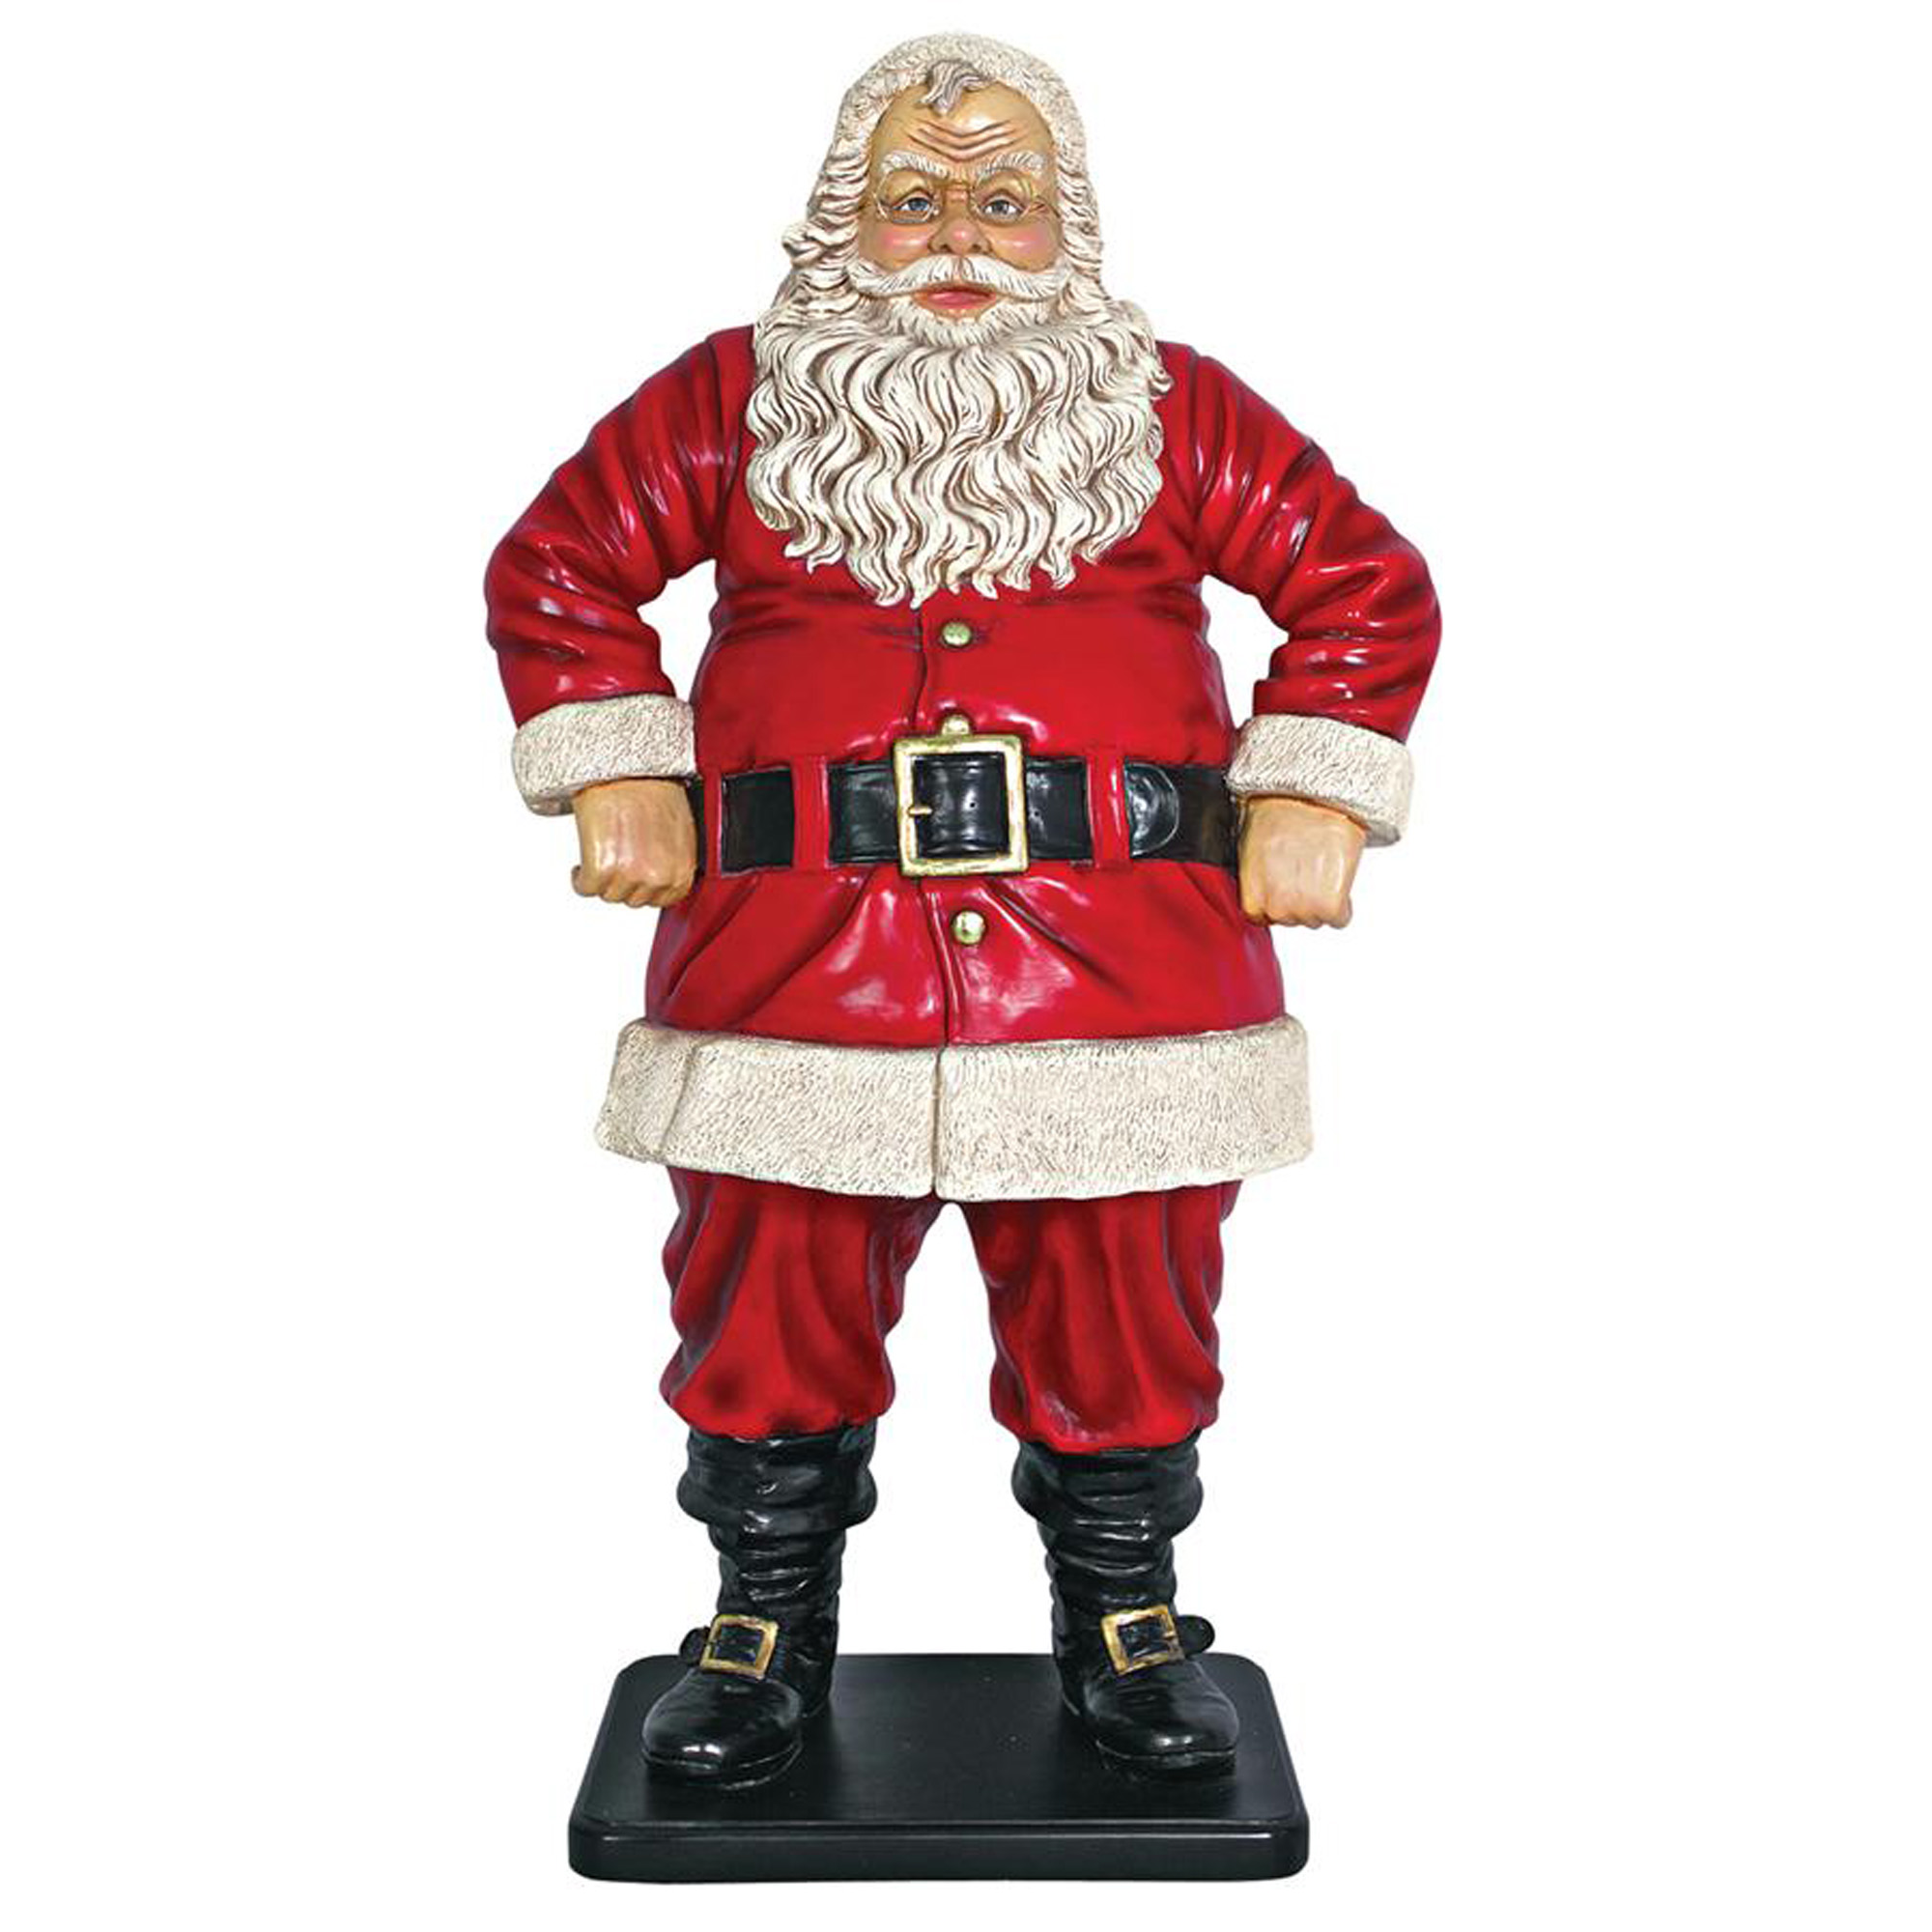 Outdoor Living and Style Large Jolly Santa Claus Outdoor Garden Christmas Statue - 50"